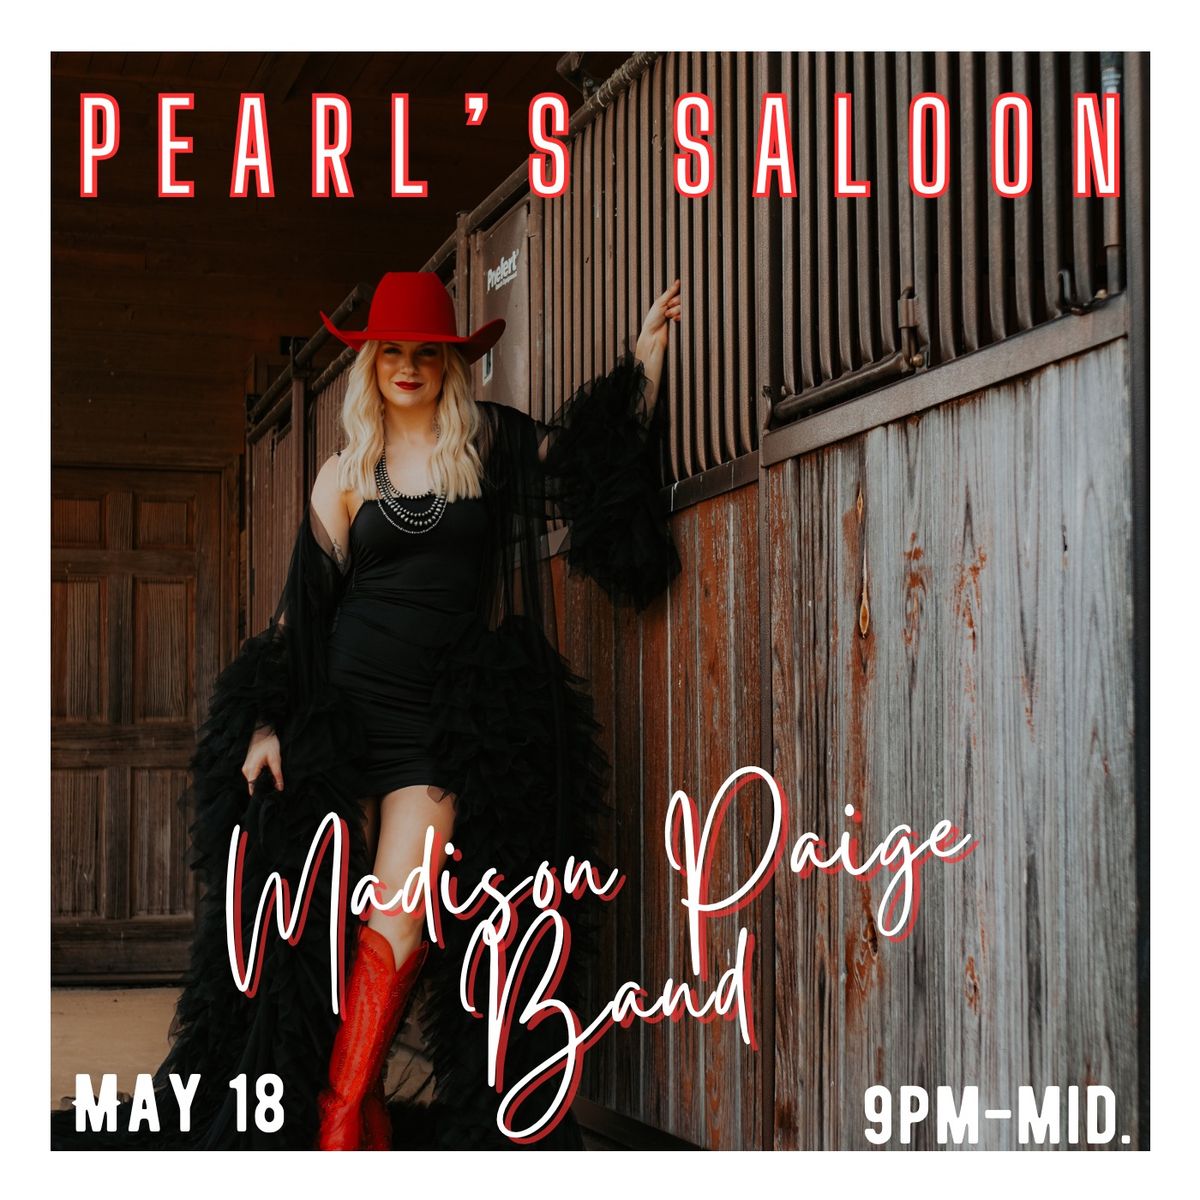 Single Release Party w\/ Madison Paige Band